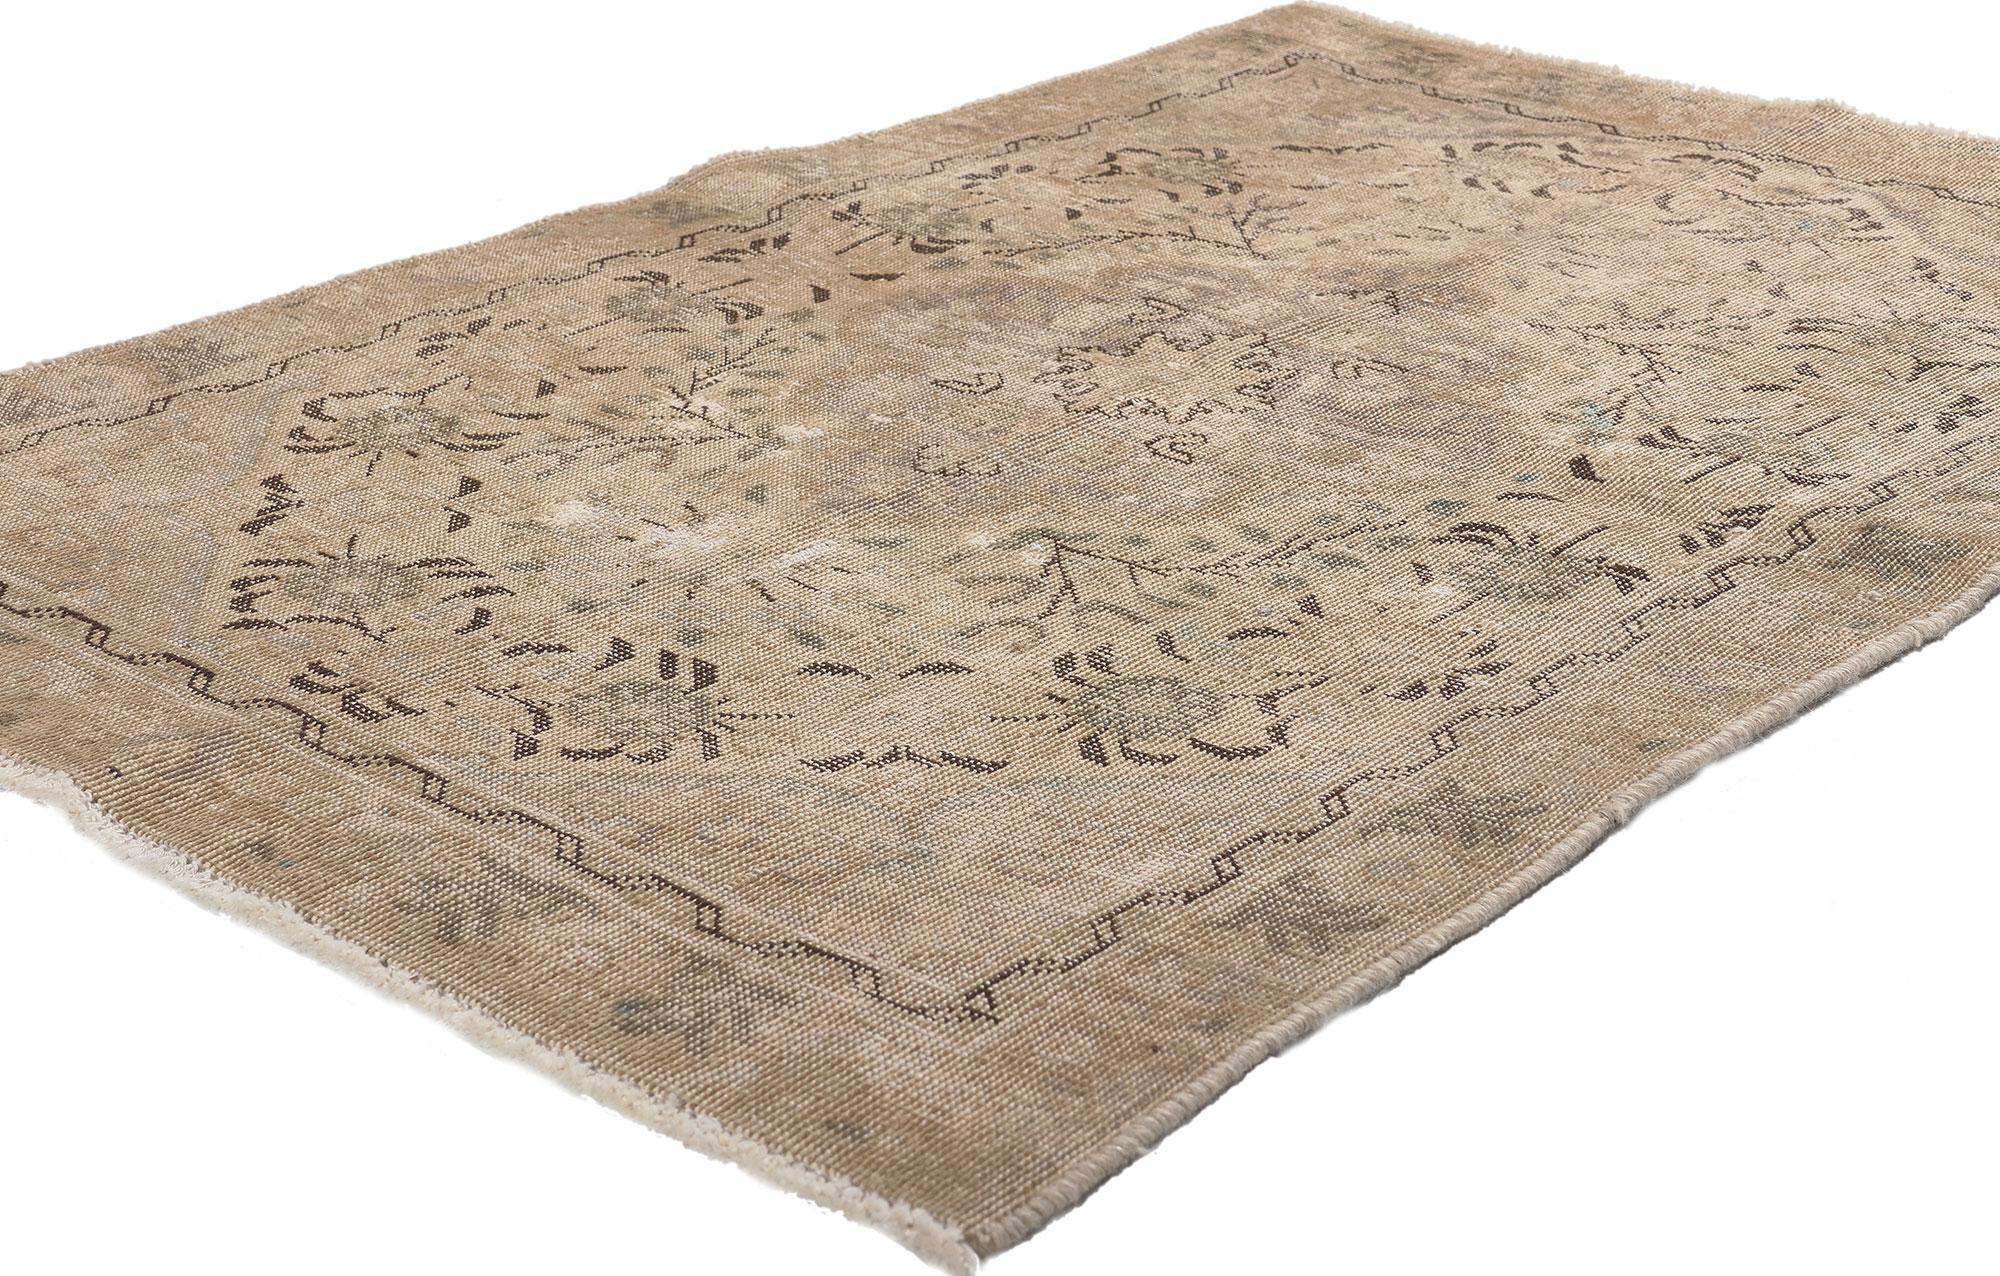 78575 Distressed Vintage Persian Tabriz Rug, 02'11 x 04'04.
Bucolic charm meets modern luxe in this distressed vintage Persian Tabriz rug. The rustic elegance and faded earth-tone color palette woven into this piece work together creating a truly